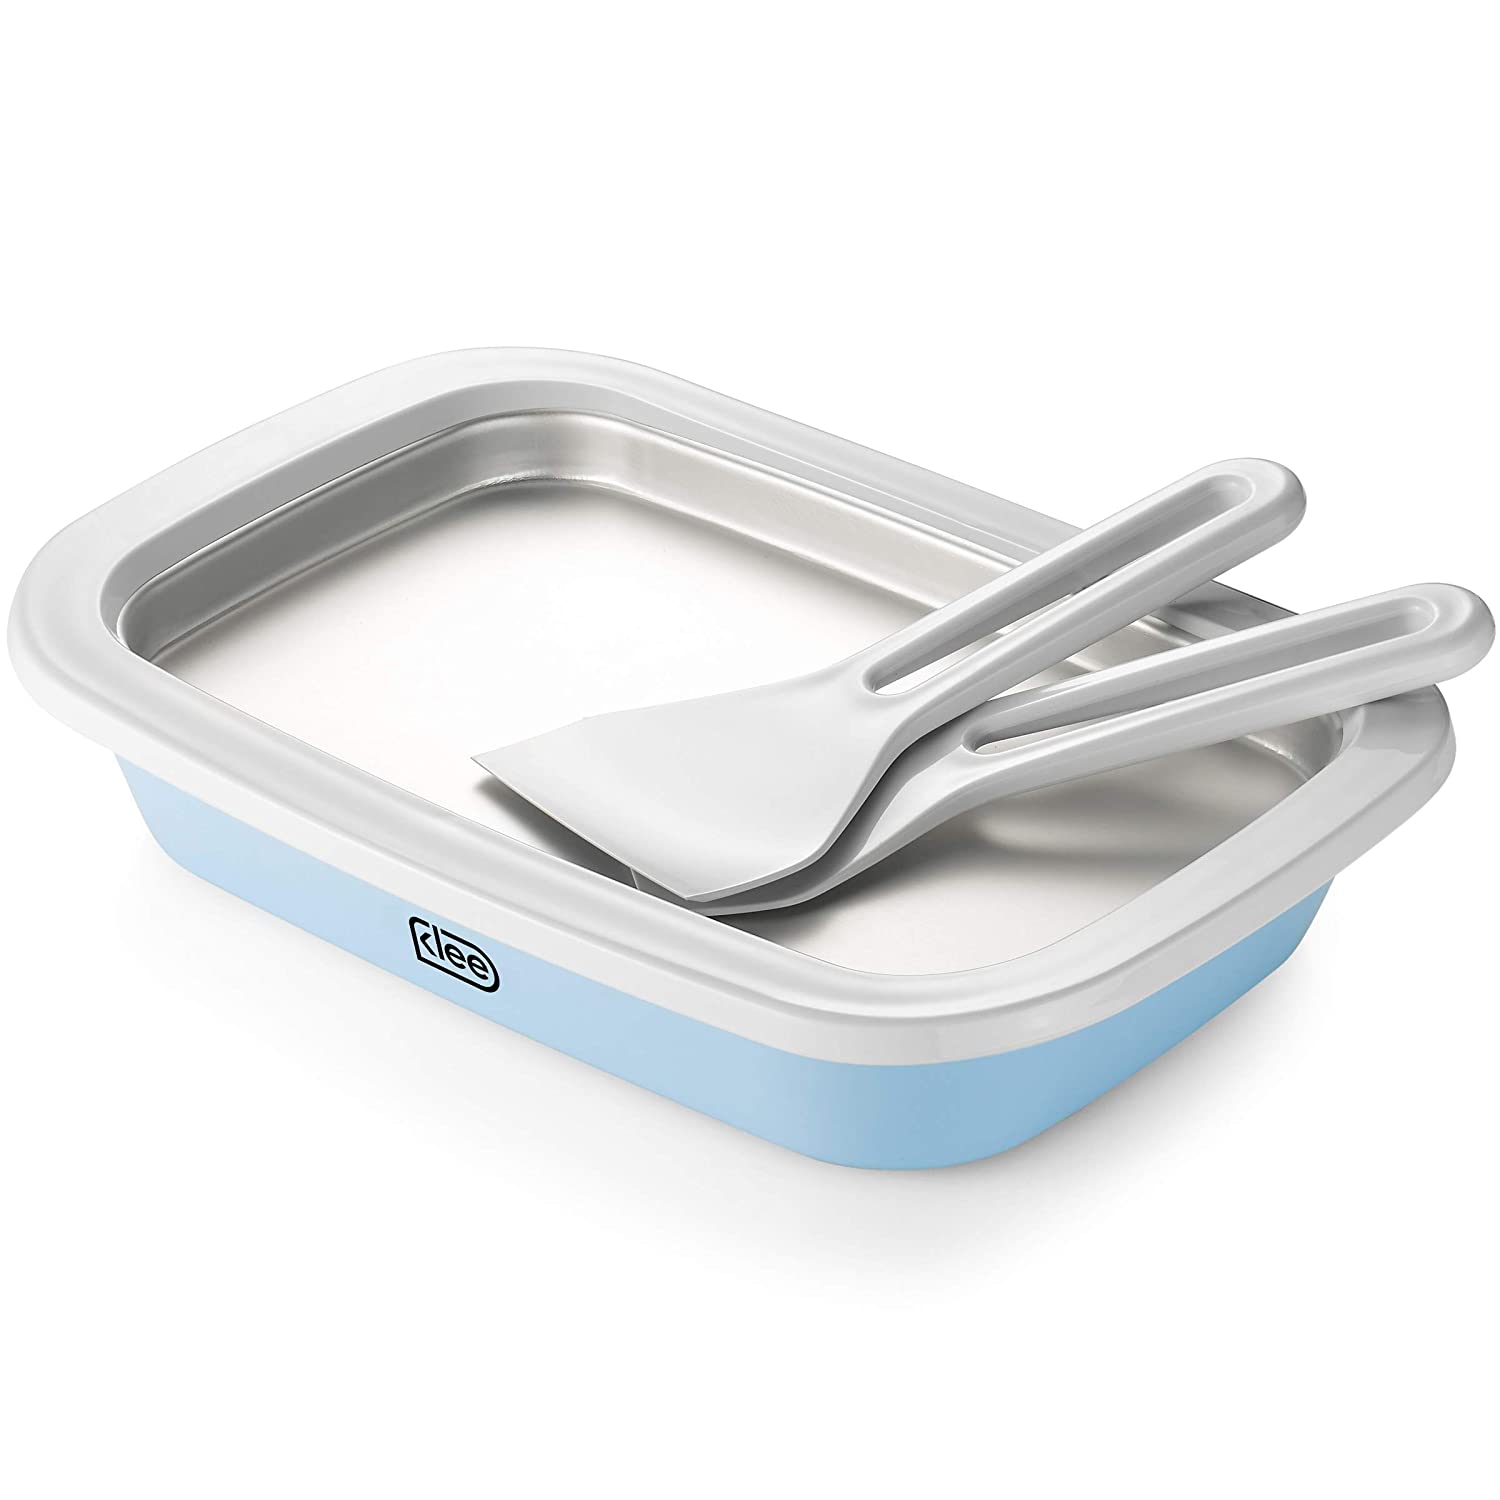 Klee 3-Piece Instant Ice Cream Maker Pan with Ice Cream Spade, Scraper and Recipes